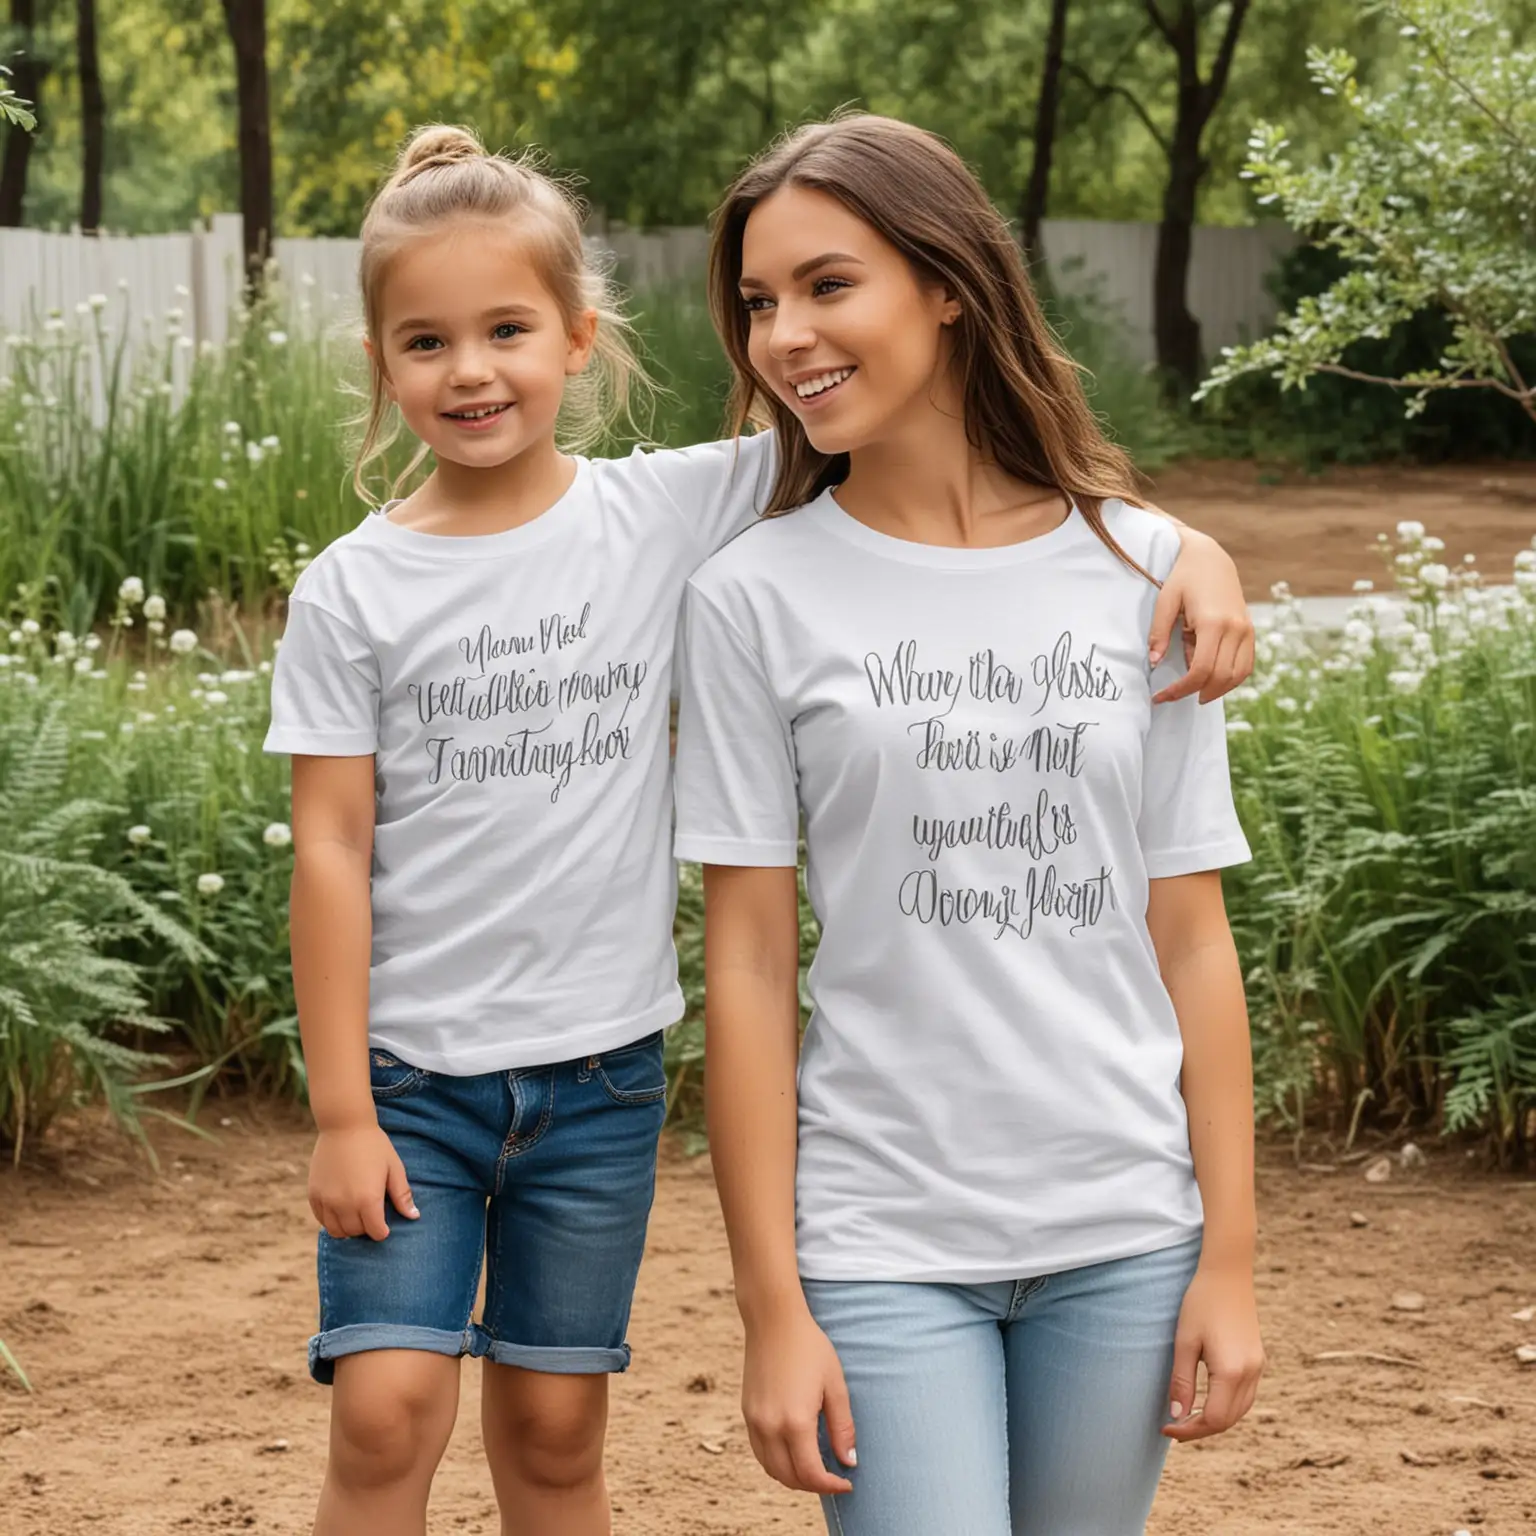 mock up for a white tee.  there should be 2 models.  the first model should be a female adult woman.  the second model should be a toddler girl.  the background of the photo should be an outdoor wedding